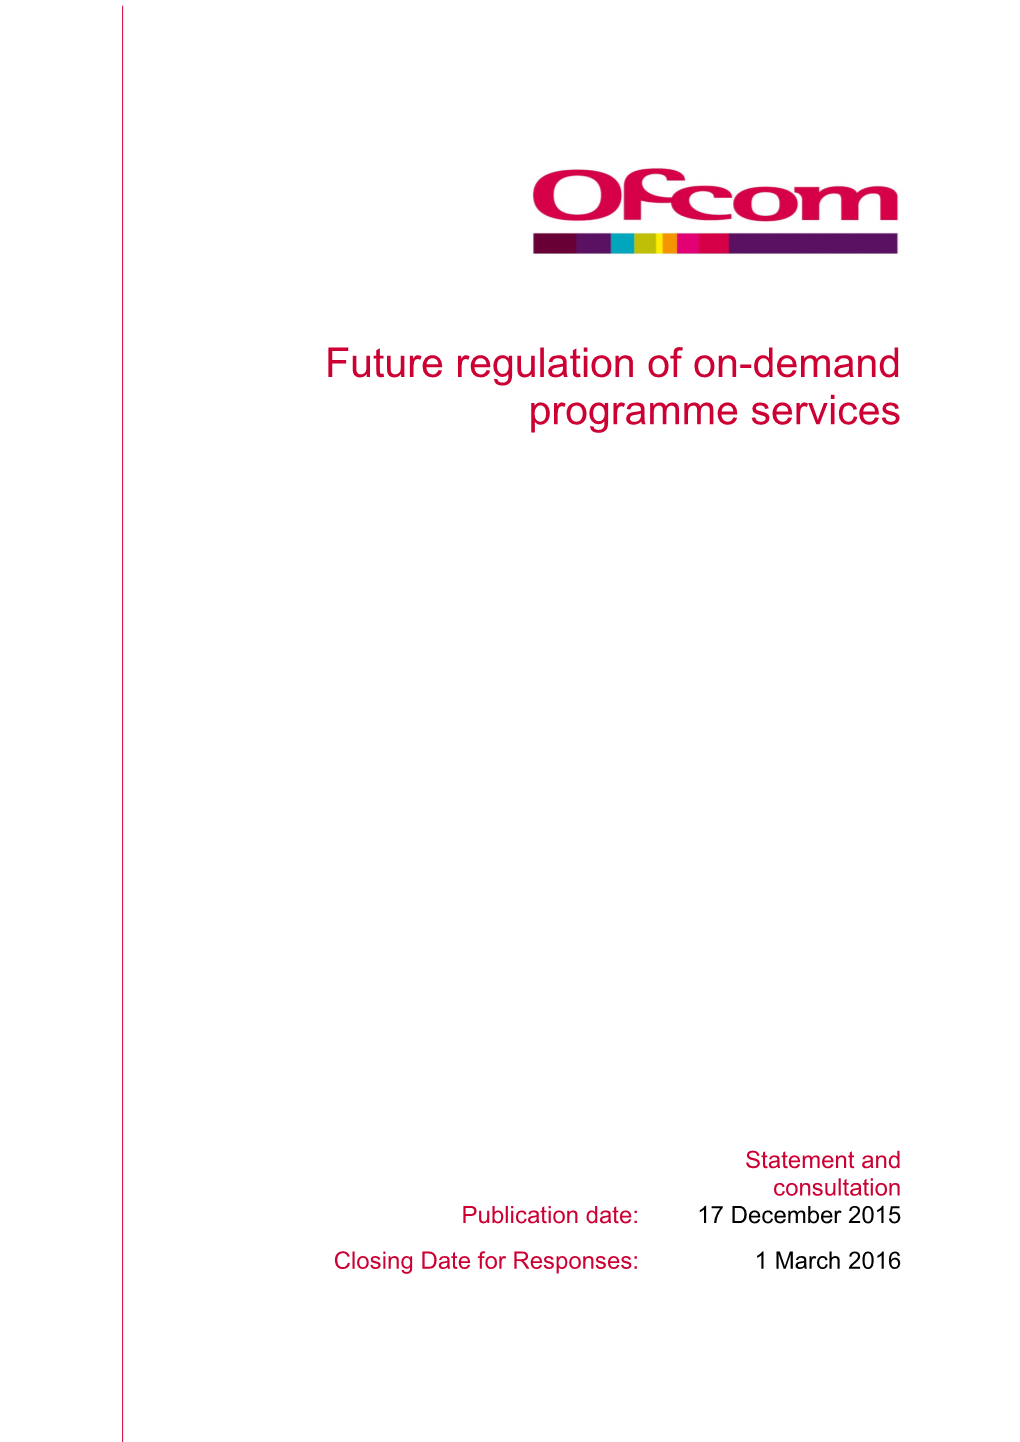 Future Regulation of On-Demand Programme Services